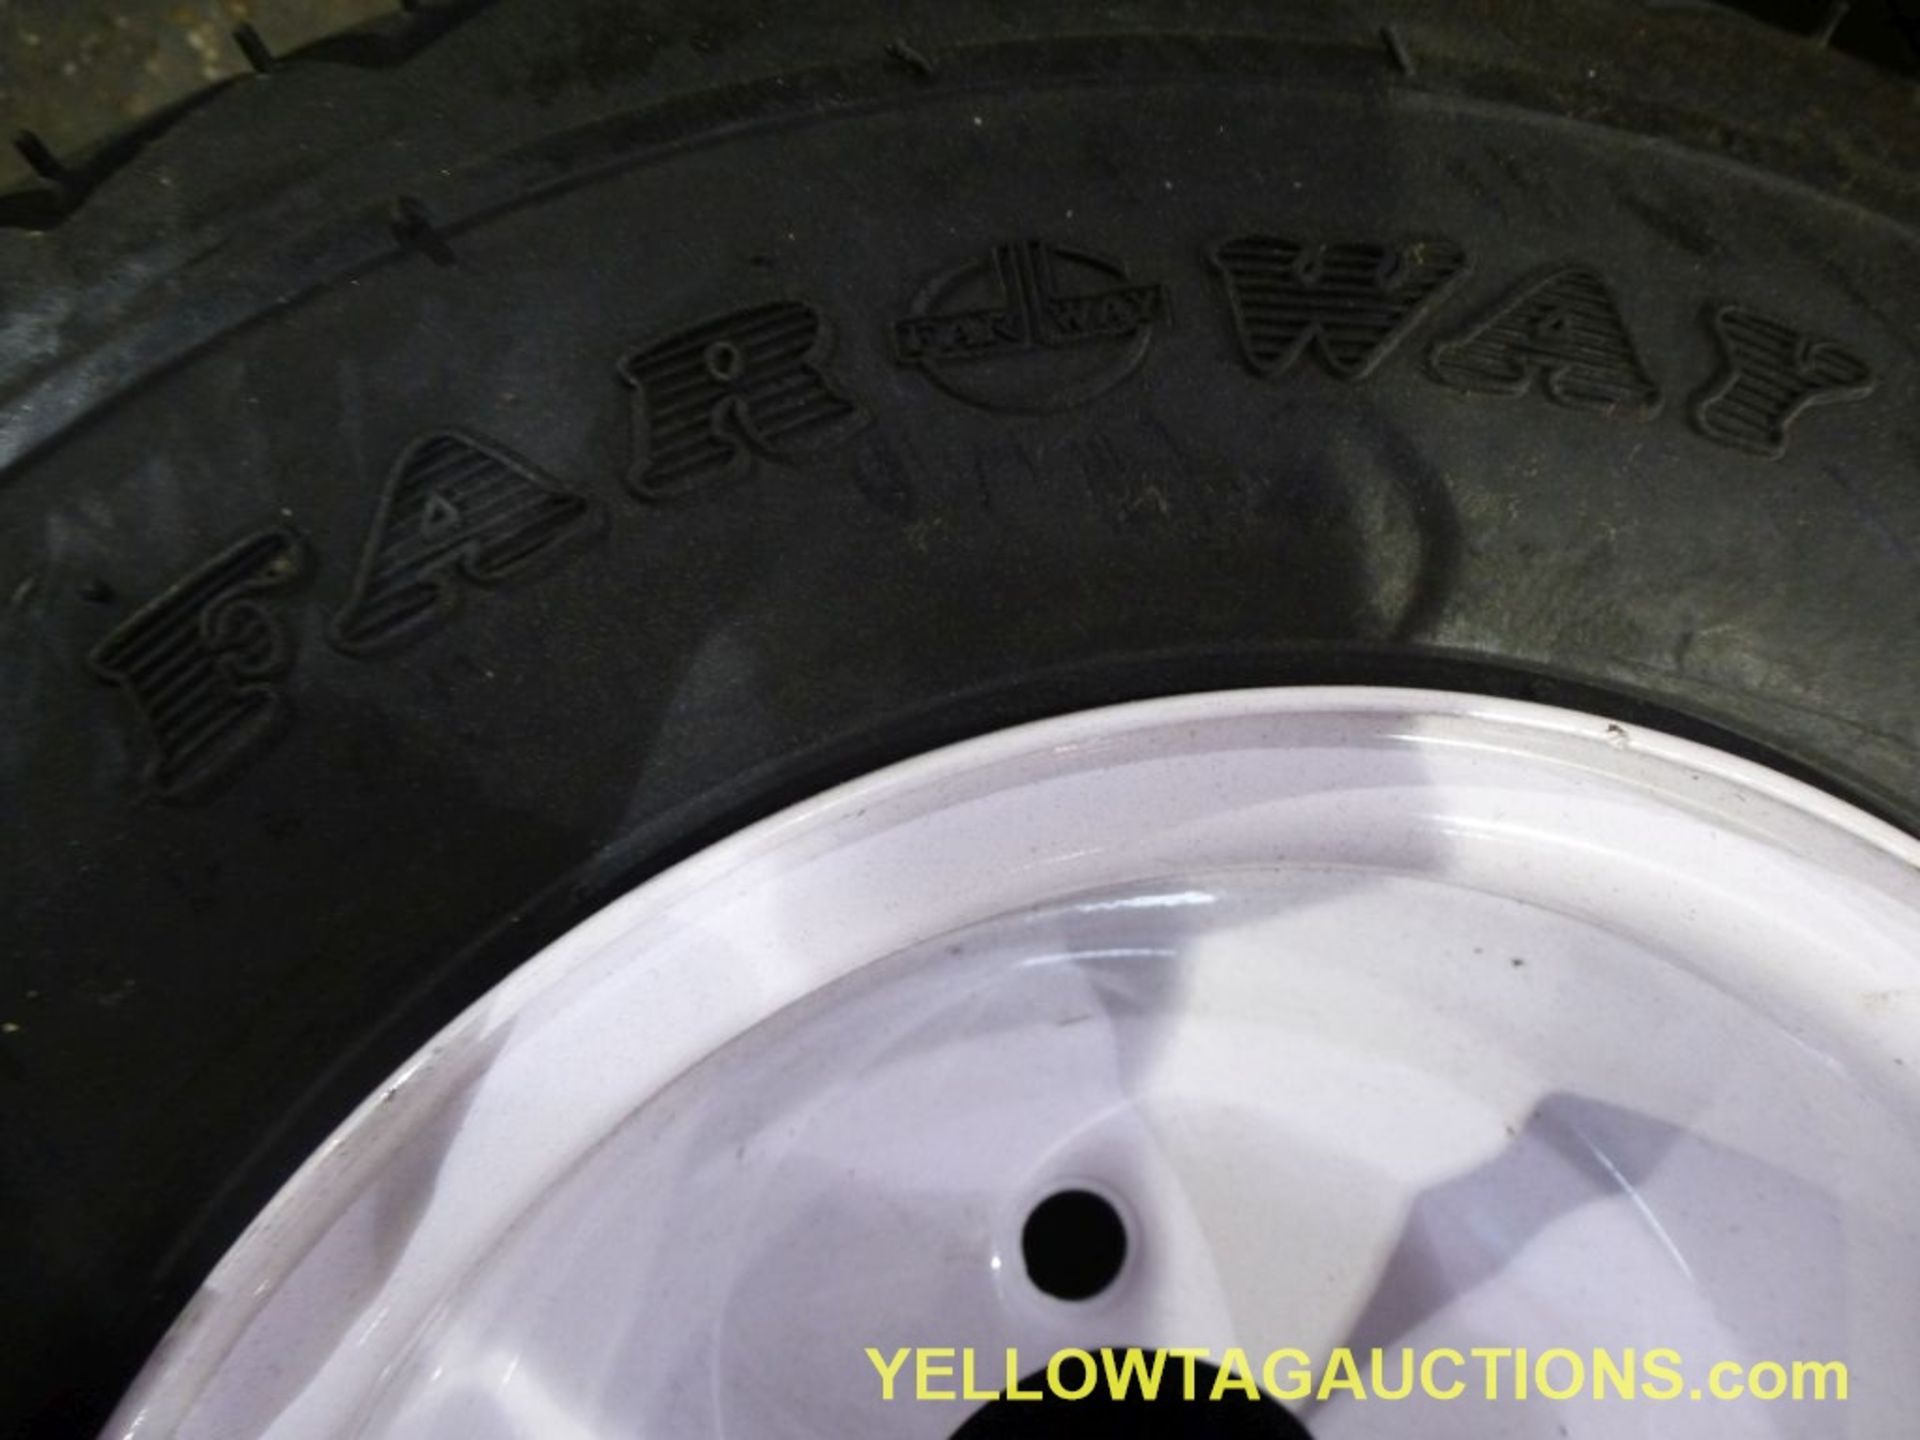 Lot of (12) FarWay 6-Ply Nylon Tires & Wheels|18 X 8.50 - 8NHS|Tag: 450 - Image 3 of 8